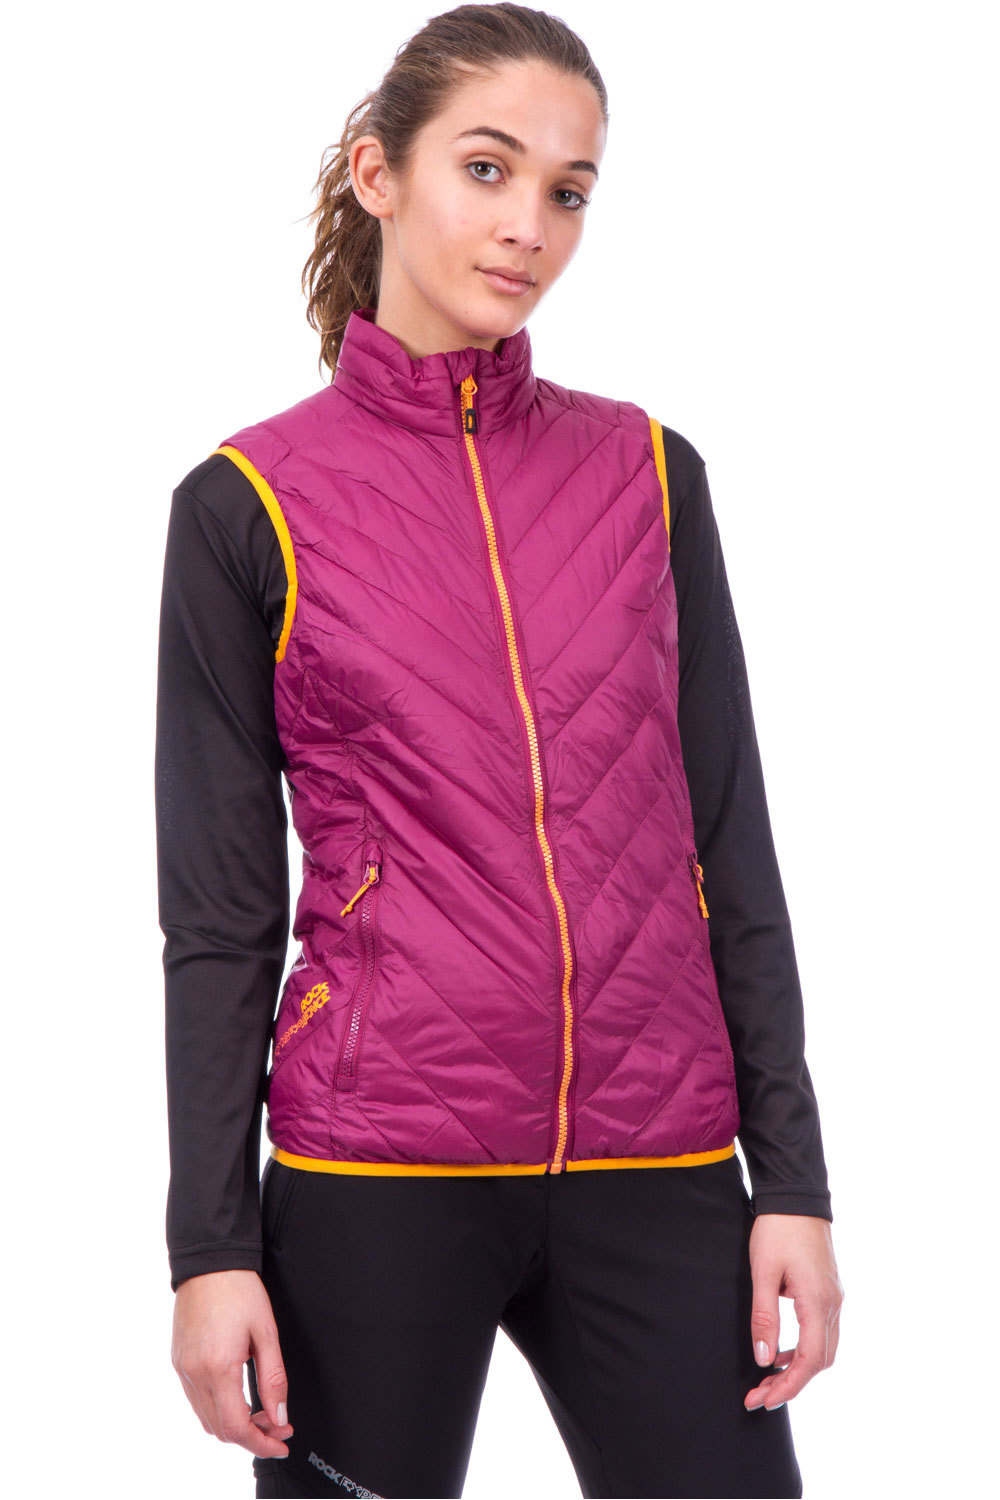 Rock Experience chaleco outdoor mujer SPIKE WOMAN PADDED VEST vista frontal